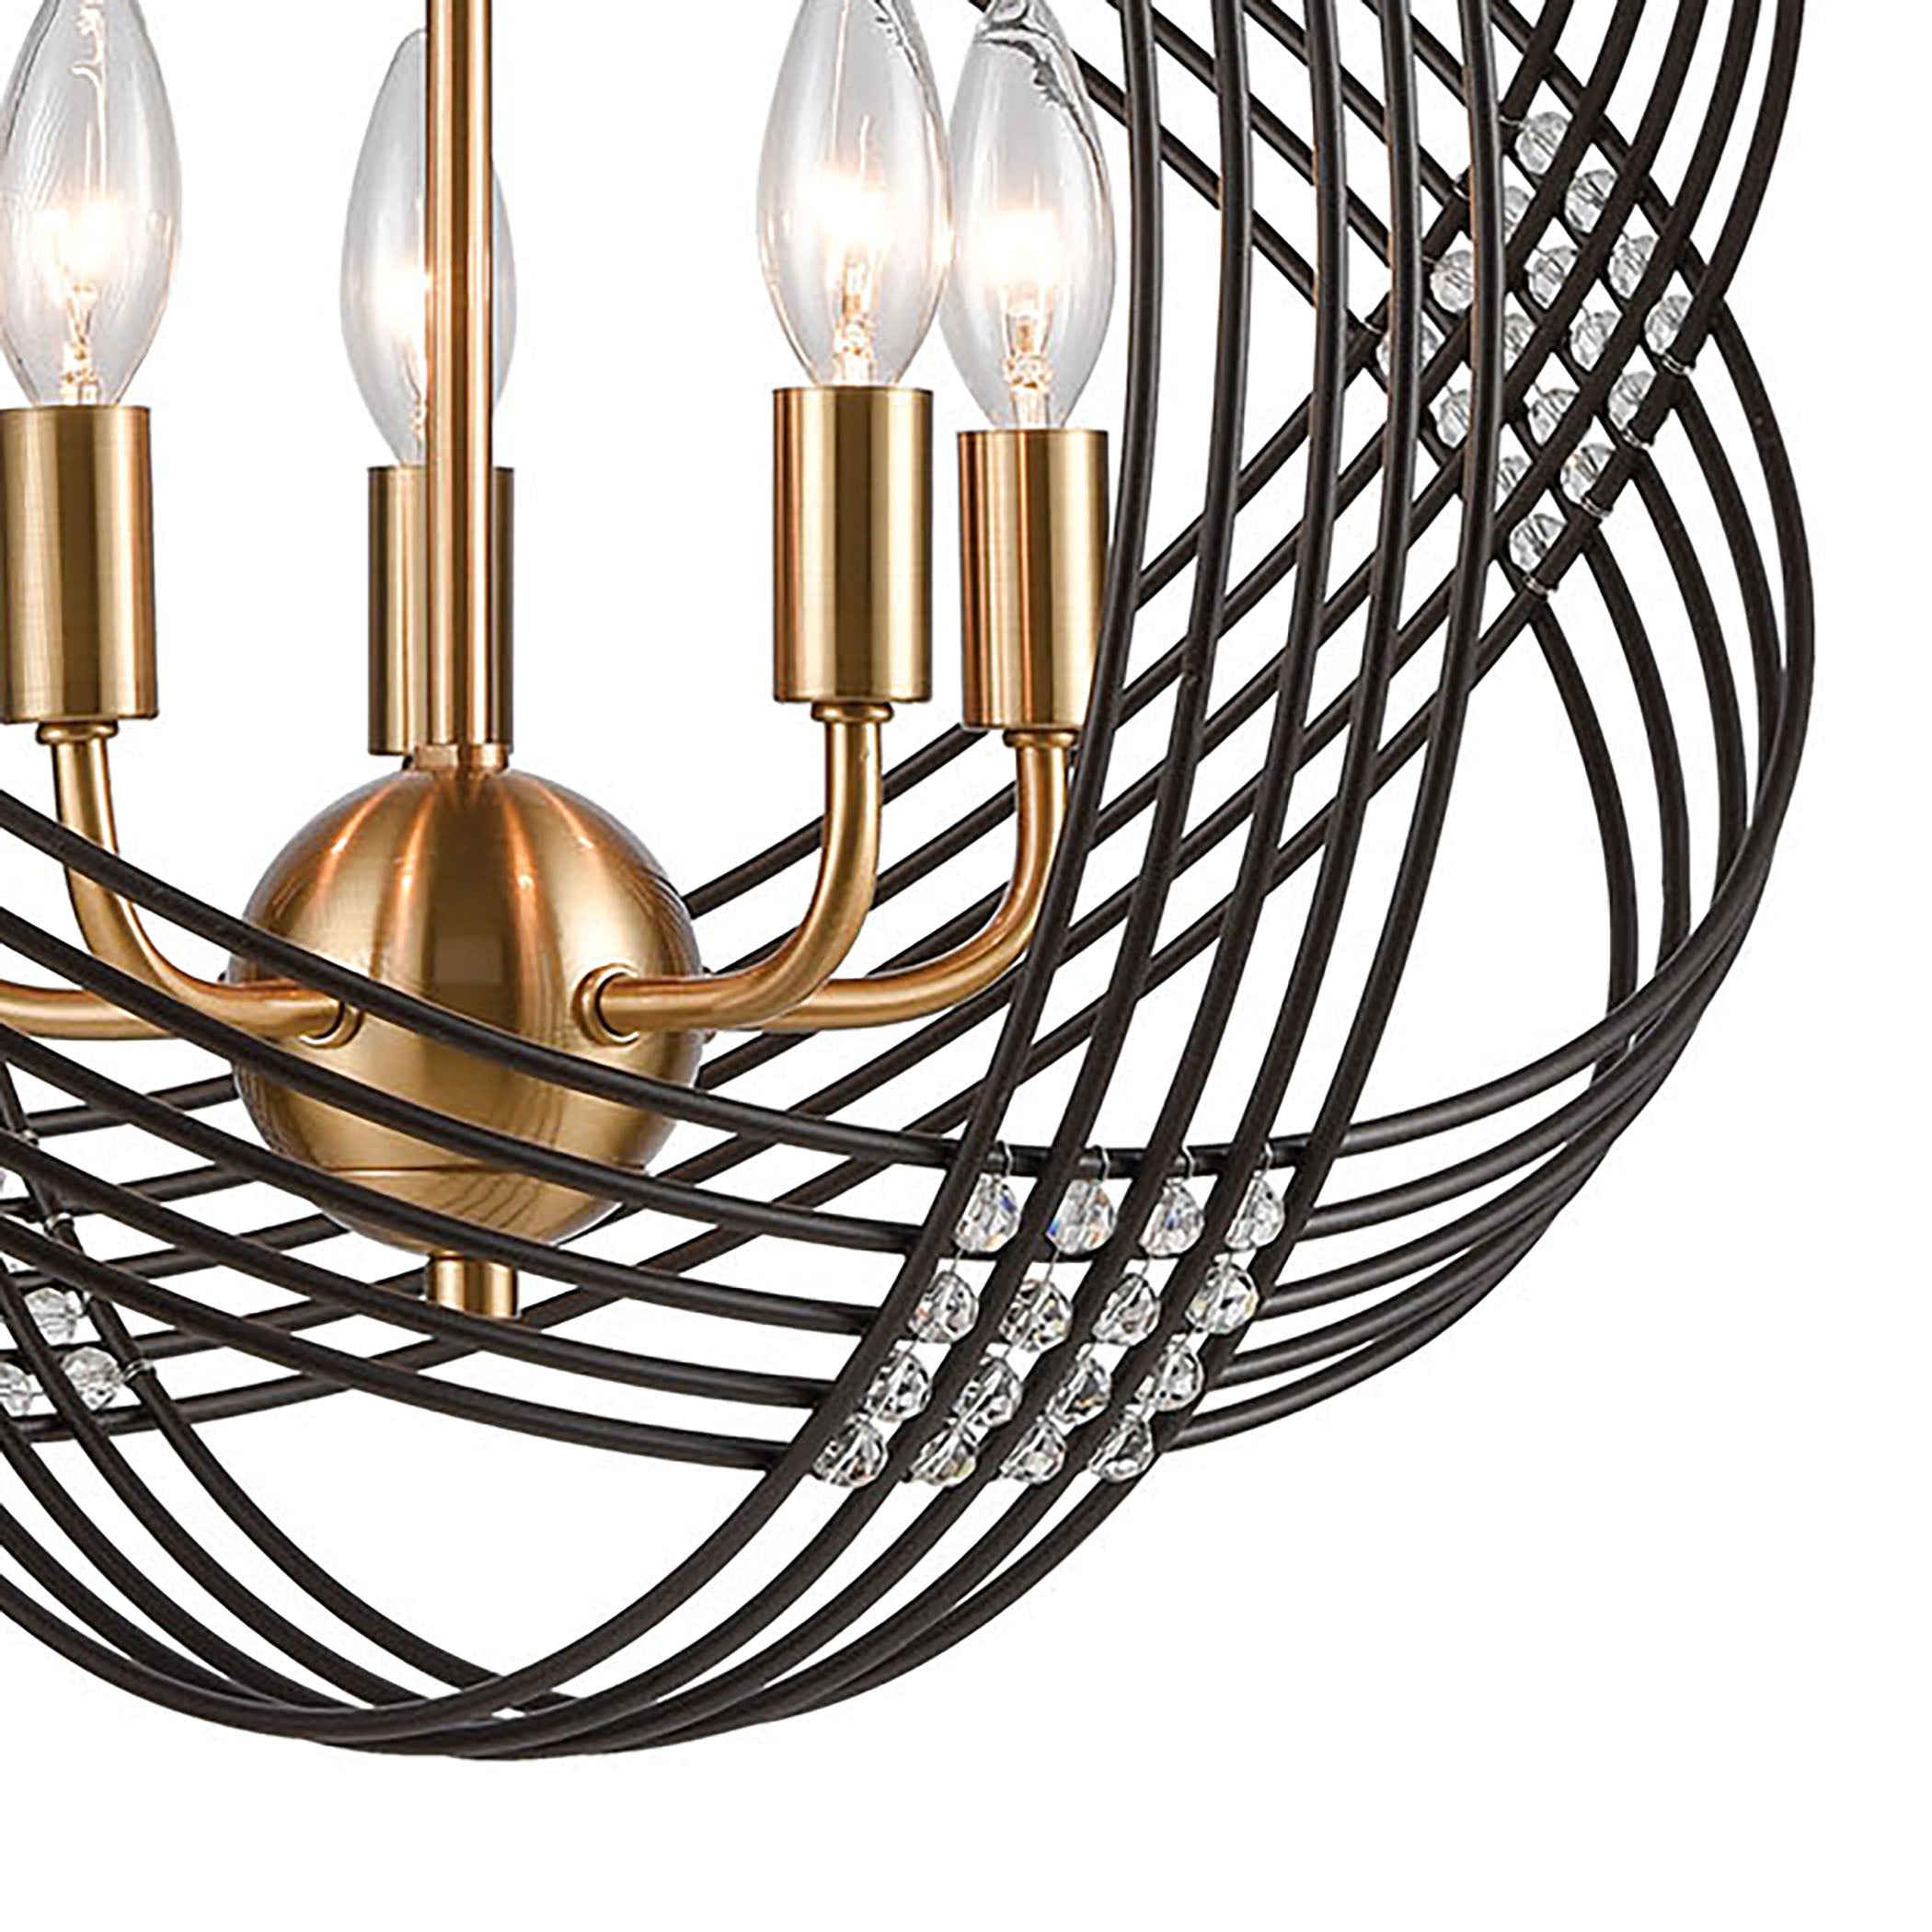 ELK Lighting 11193/5 Concentric 5-Light Chandelier in Oil Rubbed Bronze with Clear Crystal Beads